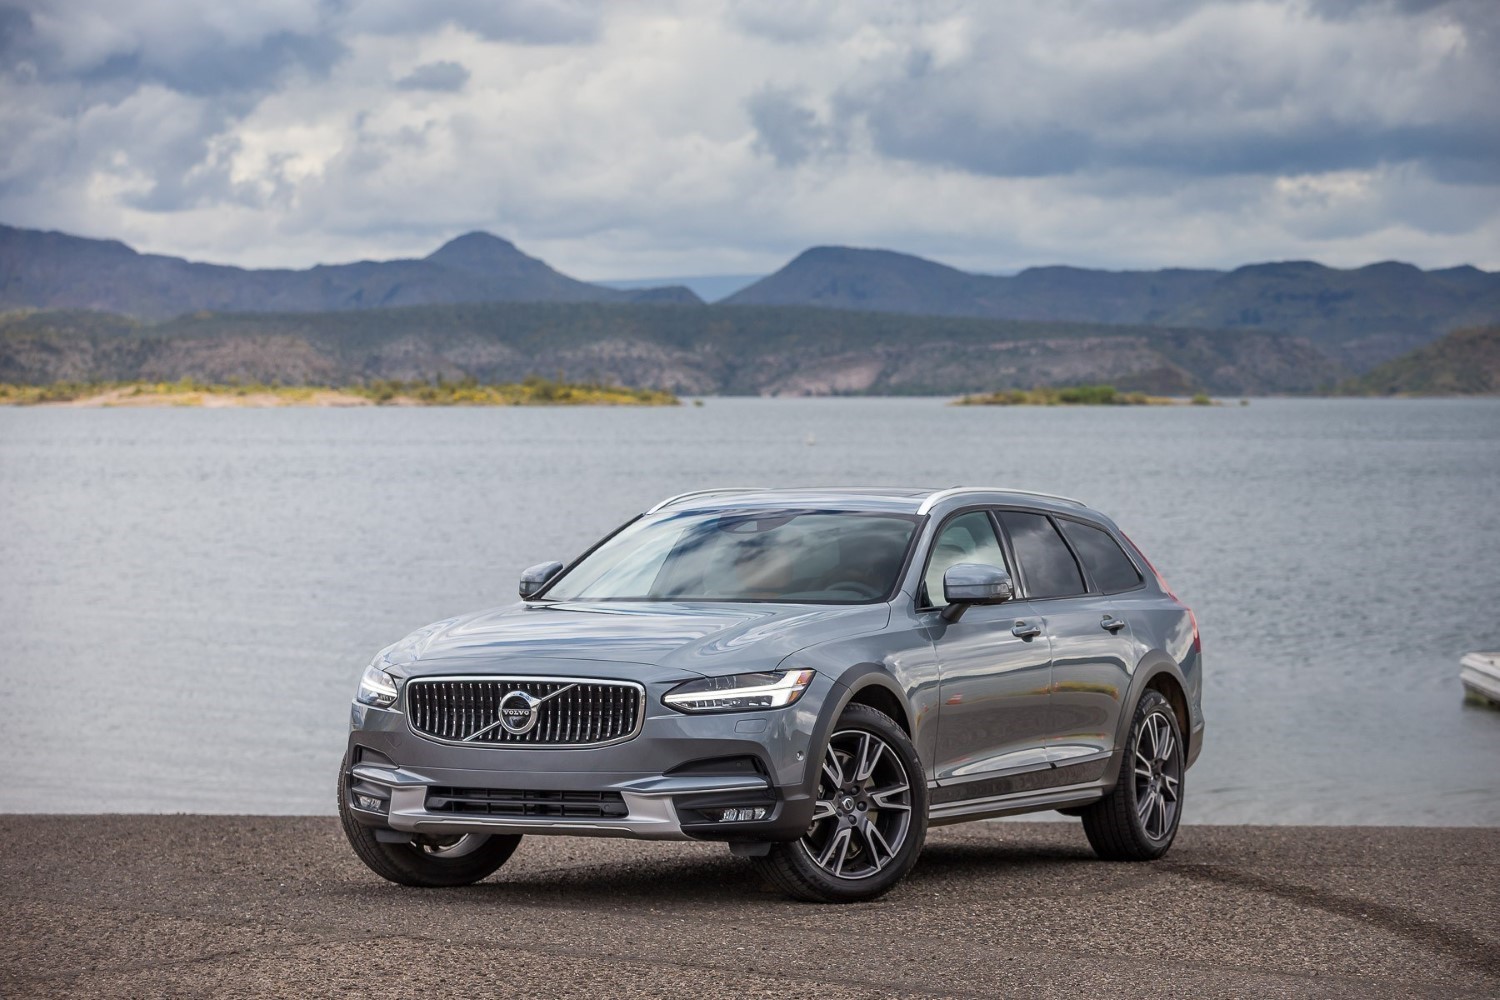 2017 Volvo V90 Cross Country Wagon Specs, Review, and